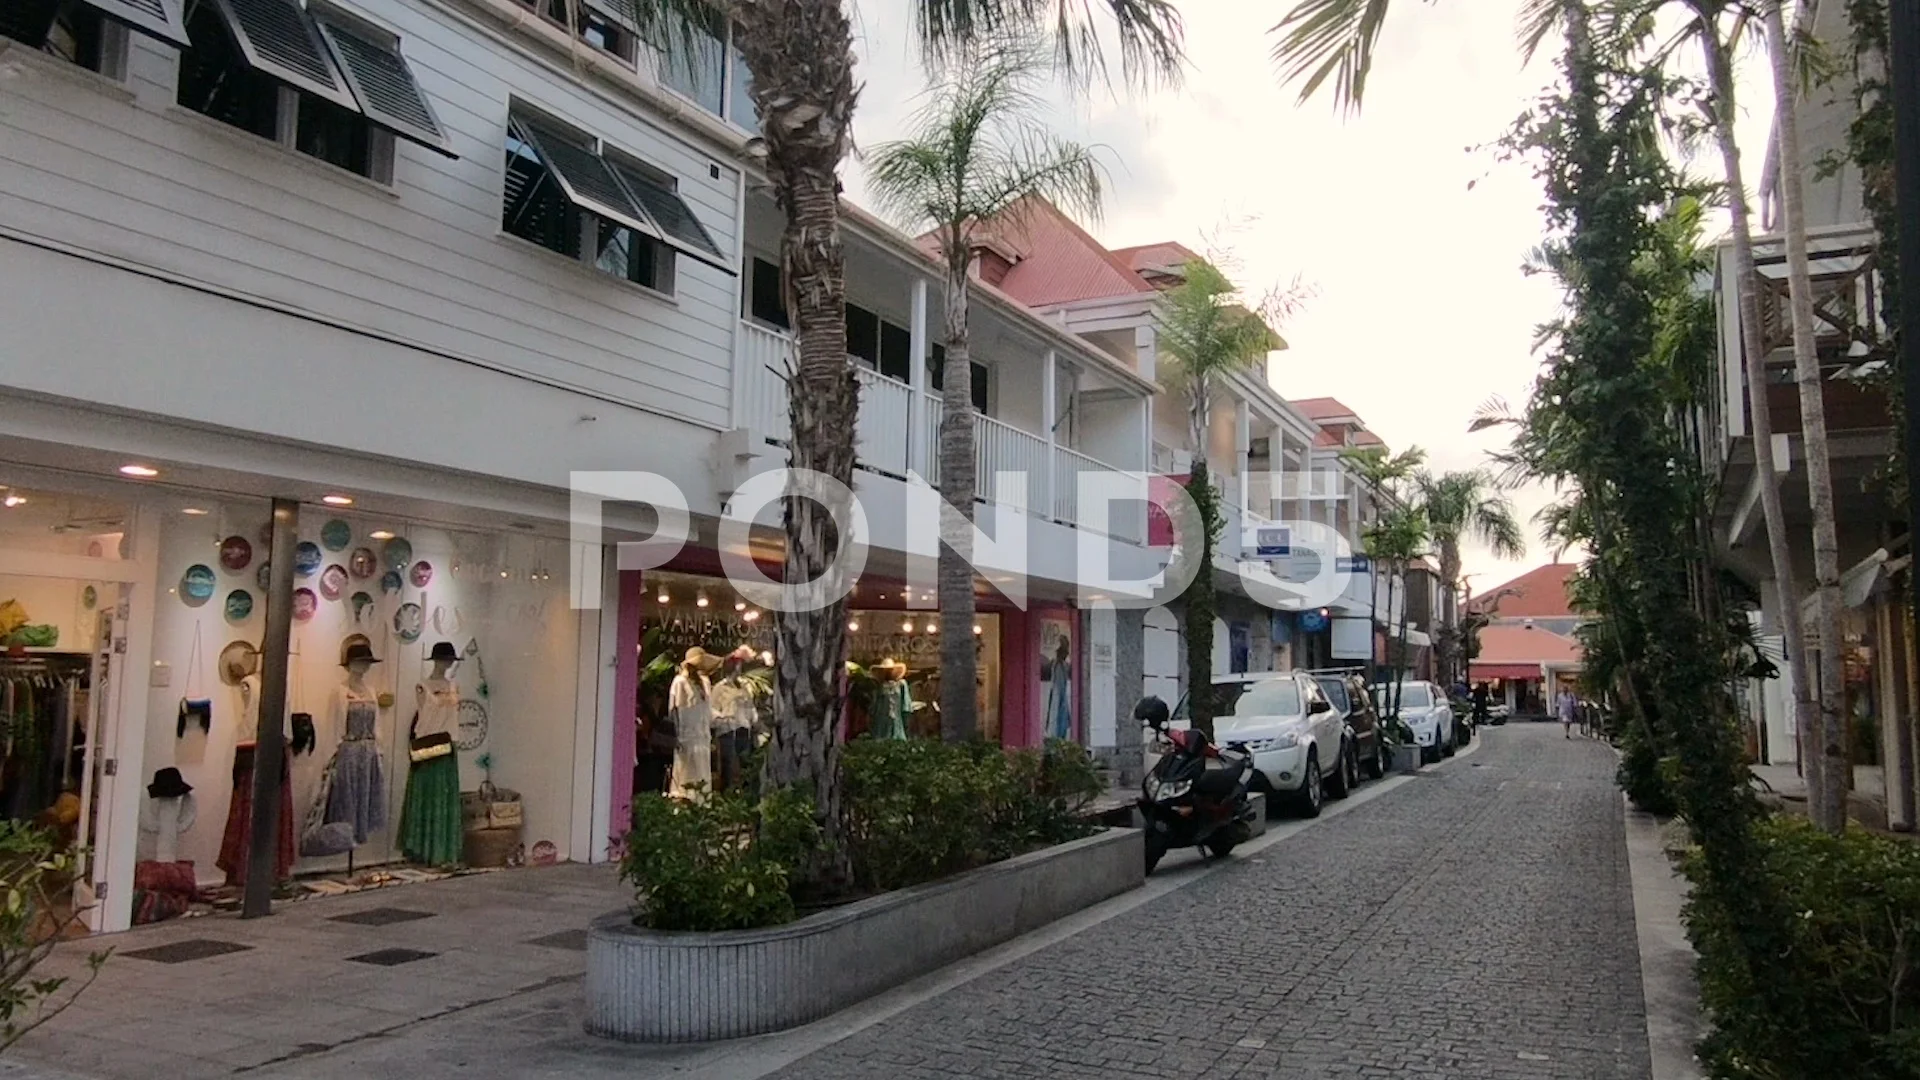 Streets of Gustavia, St Barths, Caribbean Editorial Image - Image